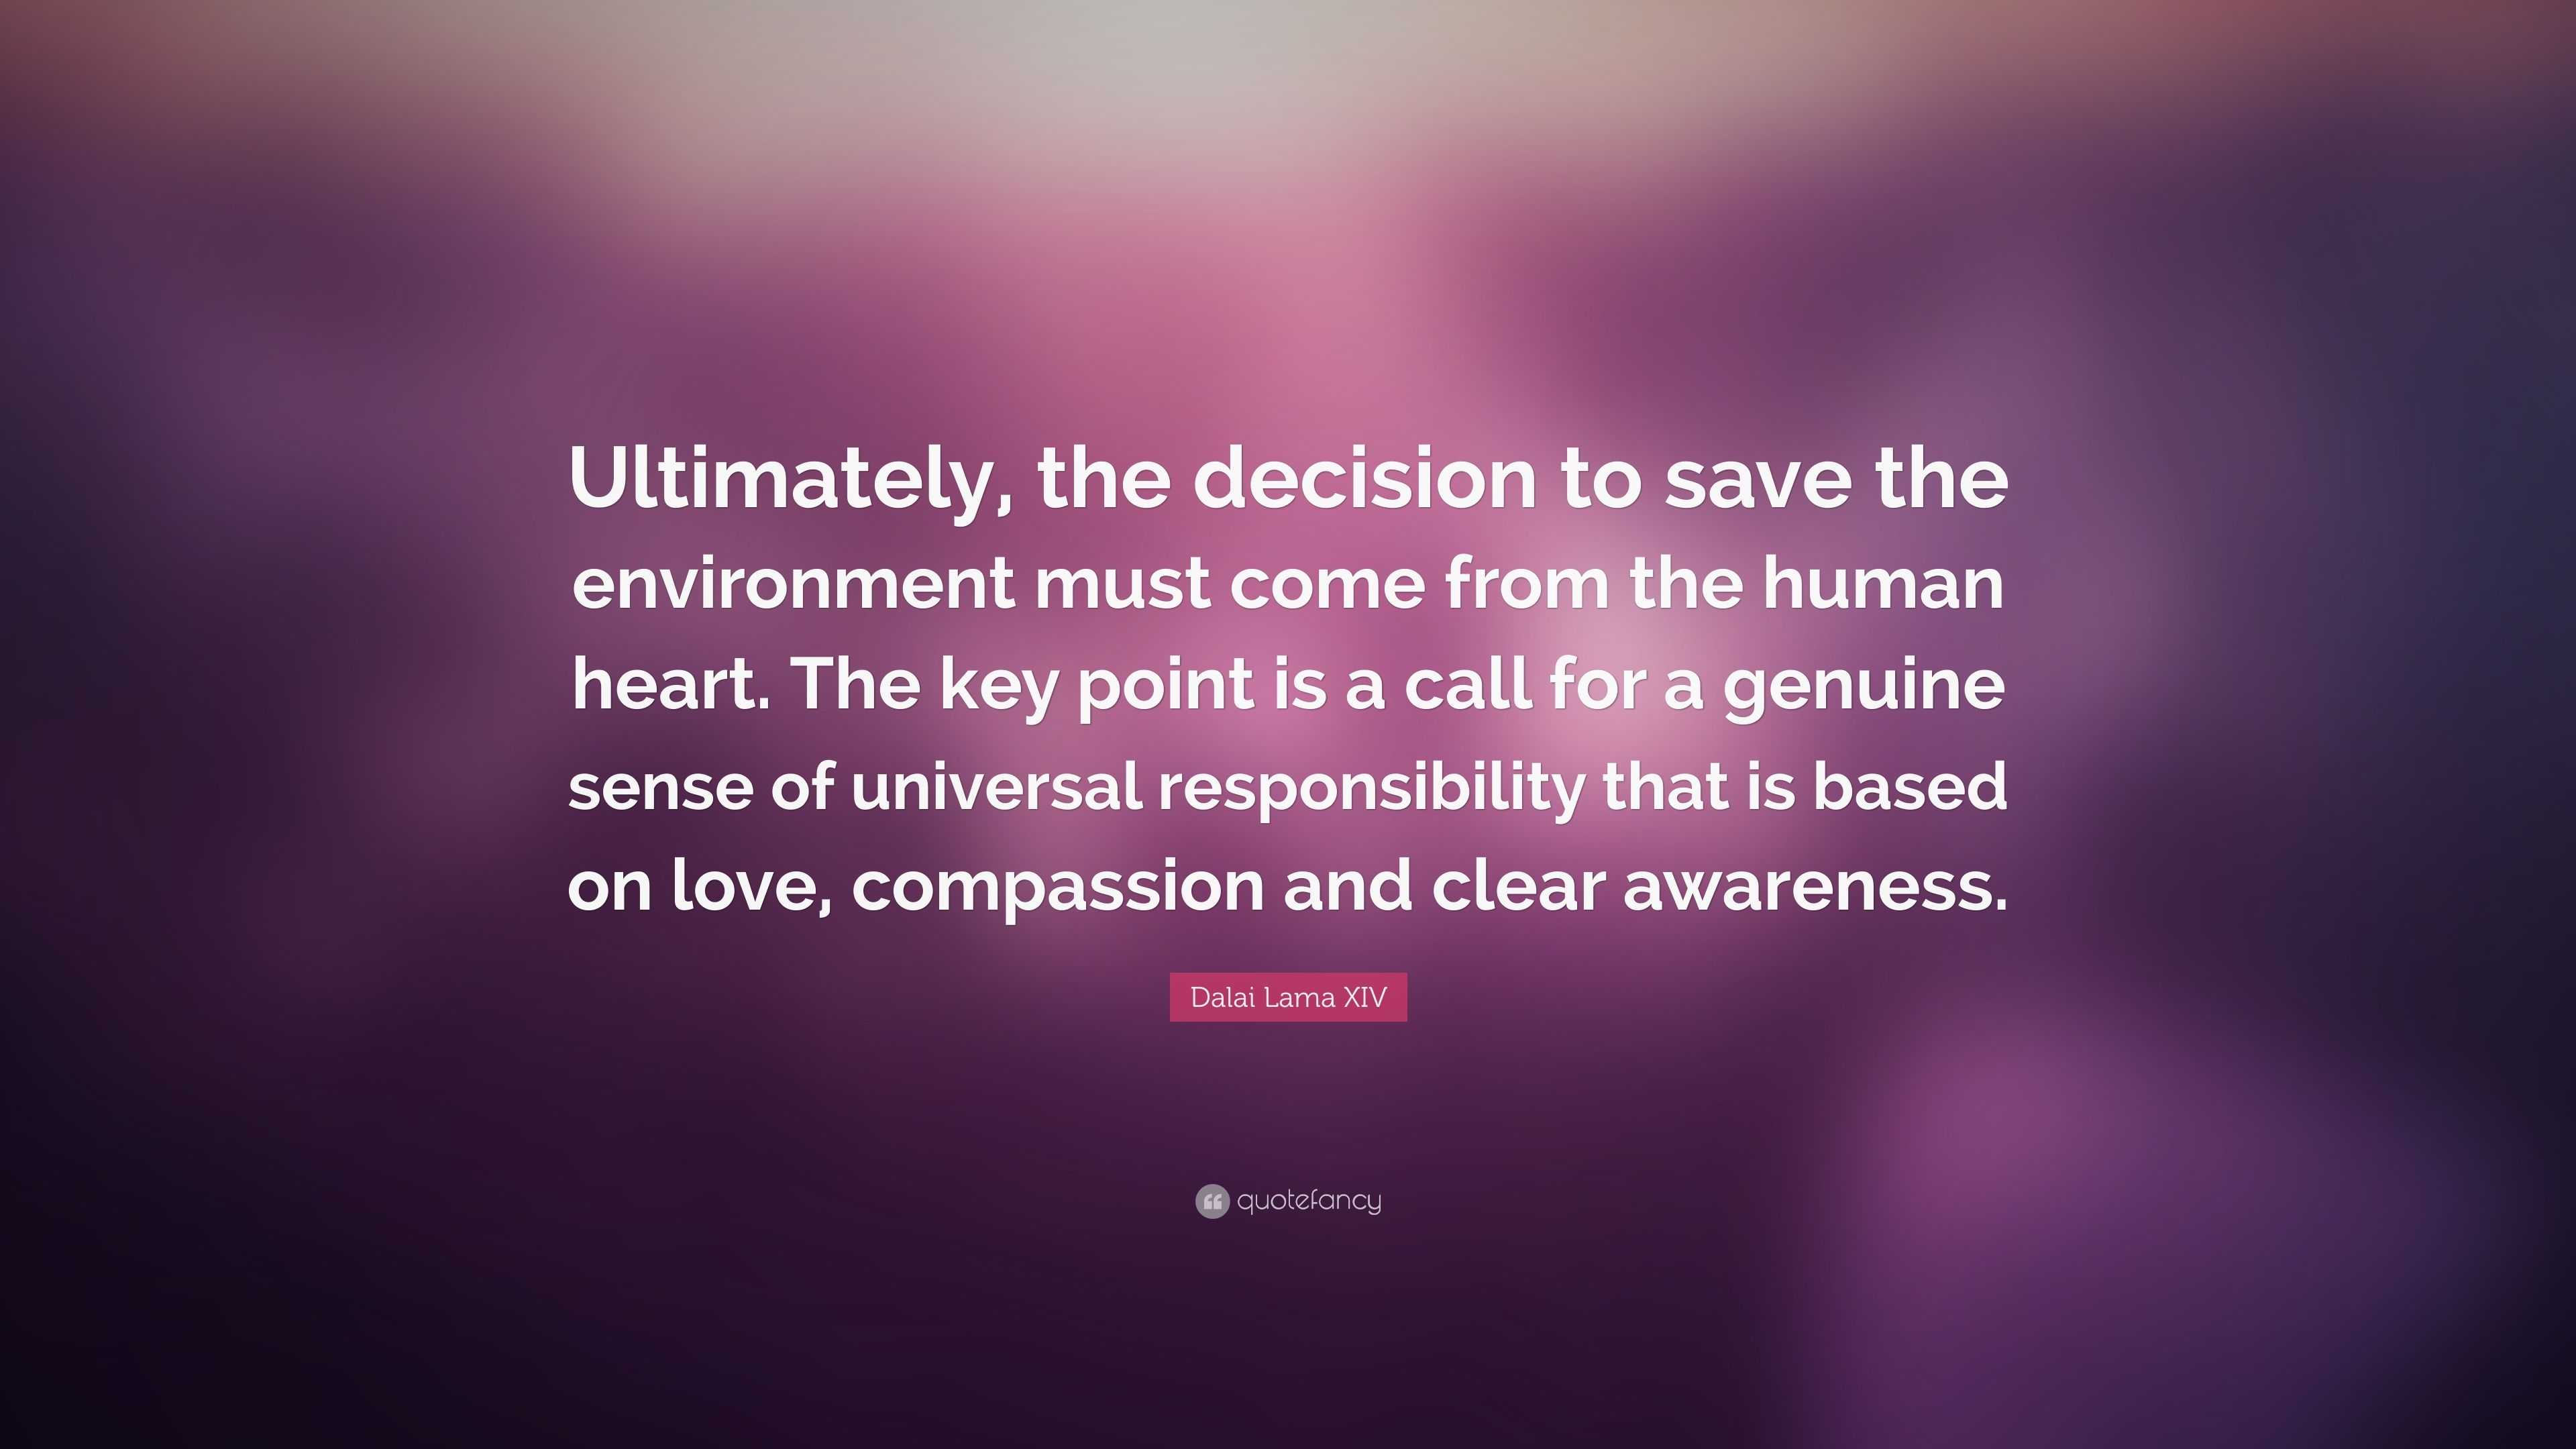 Dalai Lama XIV Quote: “Ultimately, the decision to save the environment